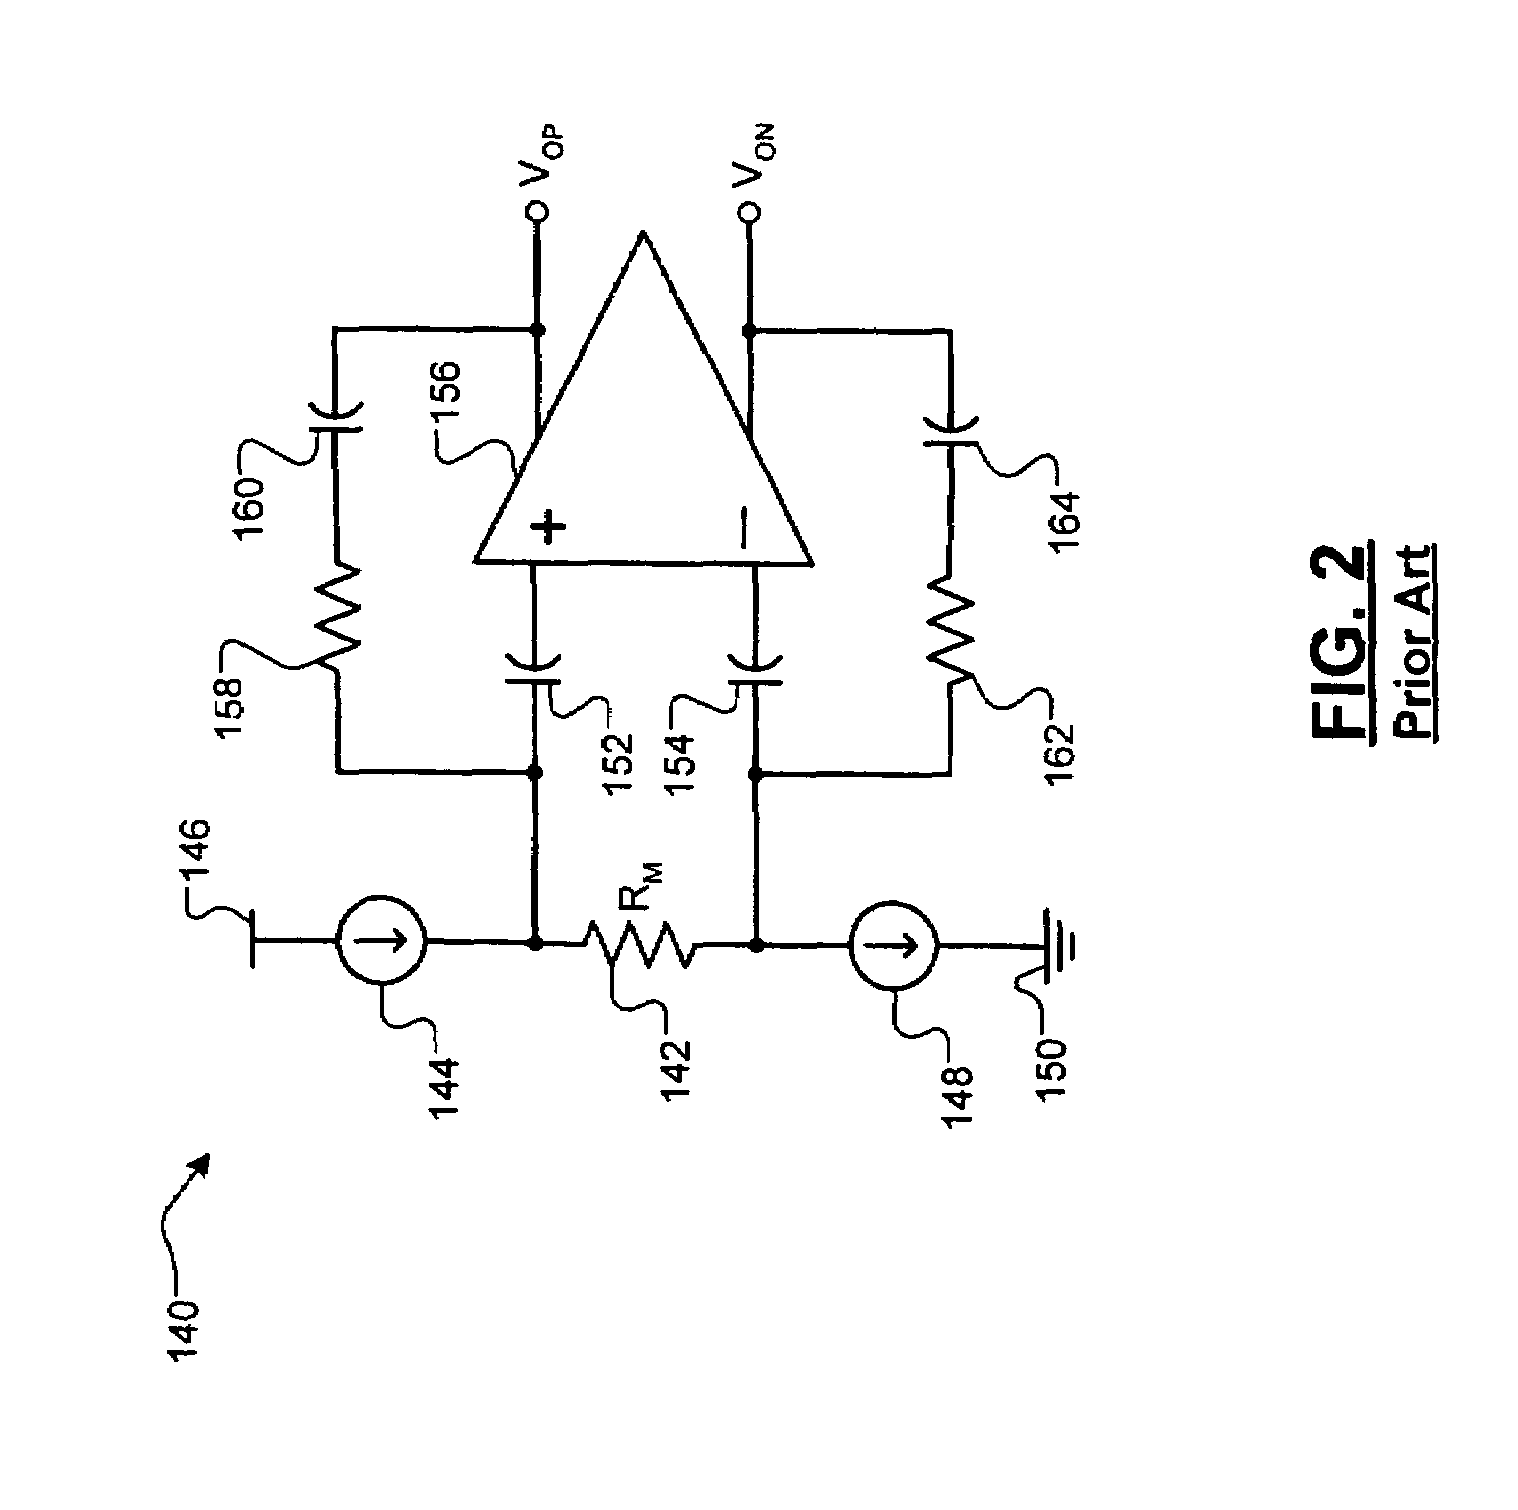 TMR/GMR amplifier with input current compensation